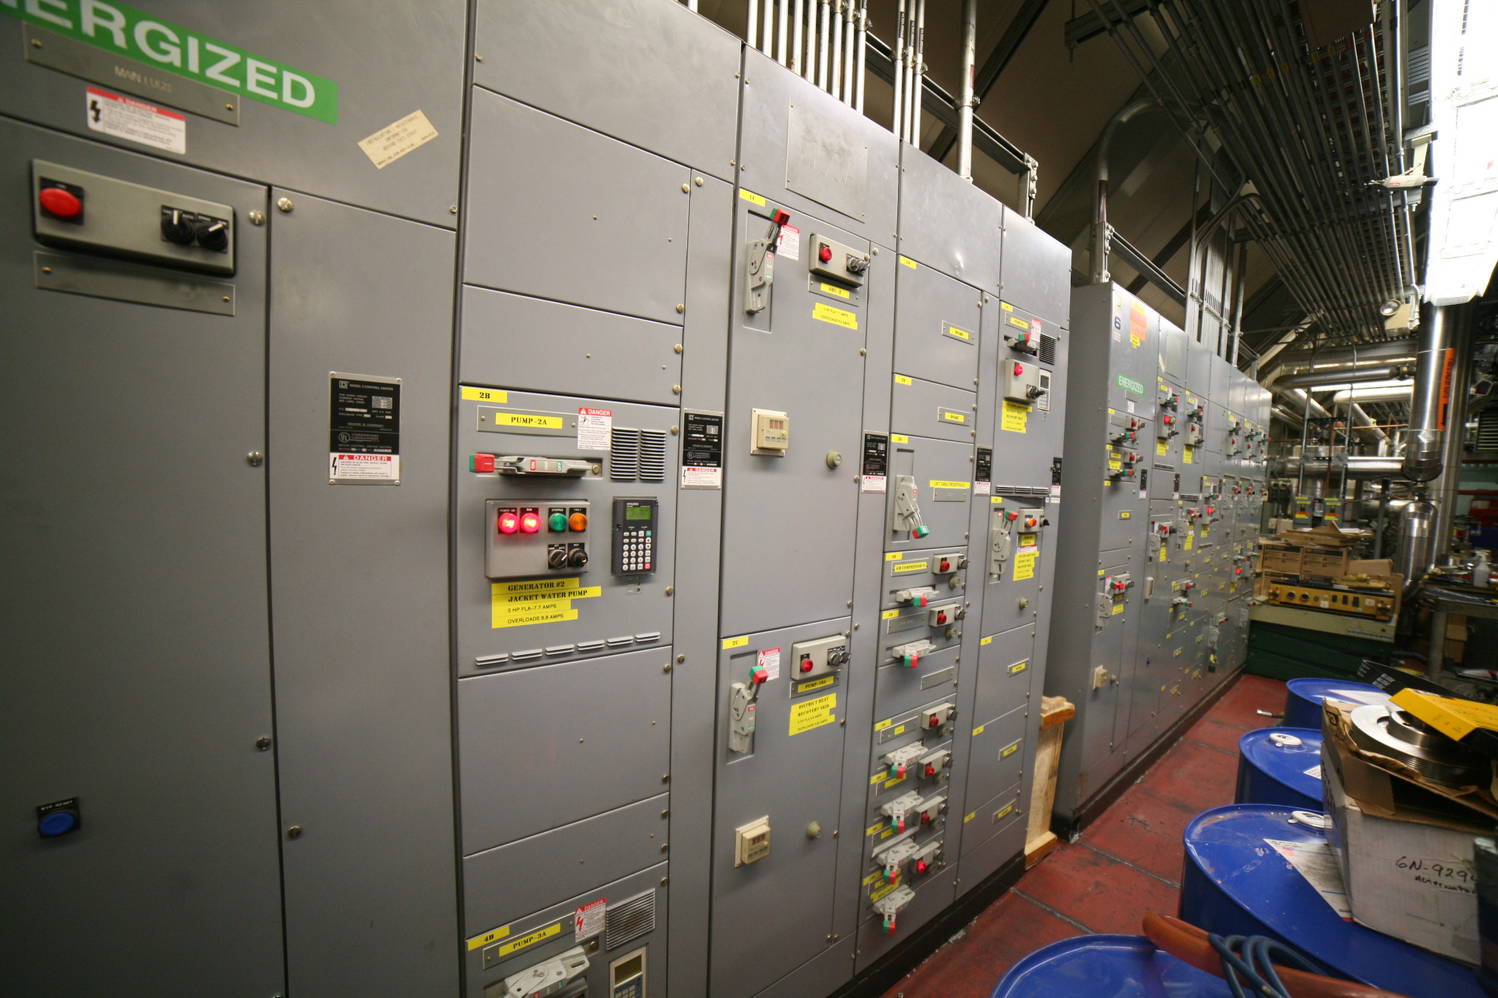 Power plant electrical panel